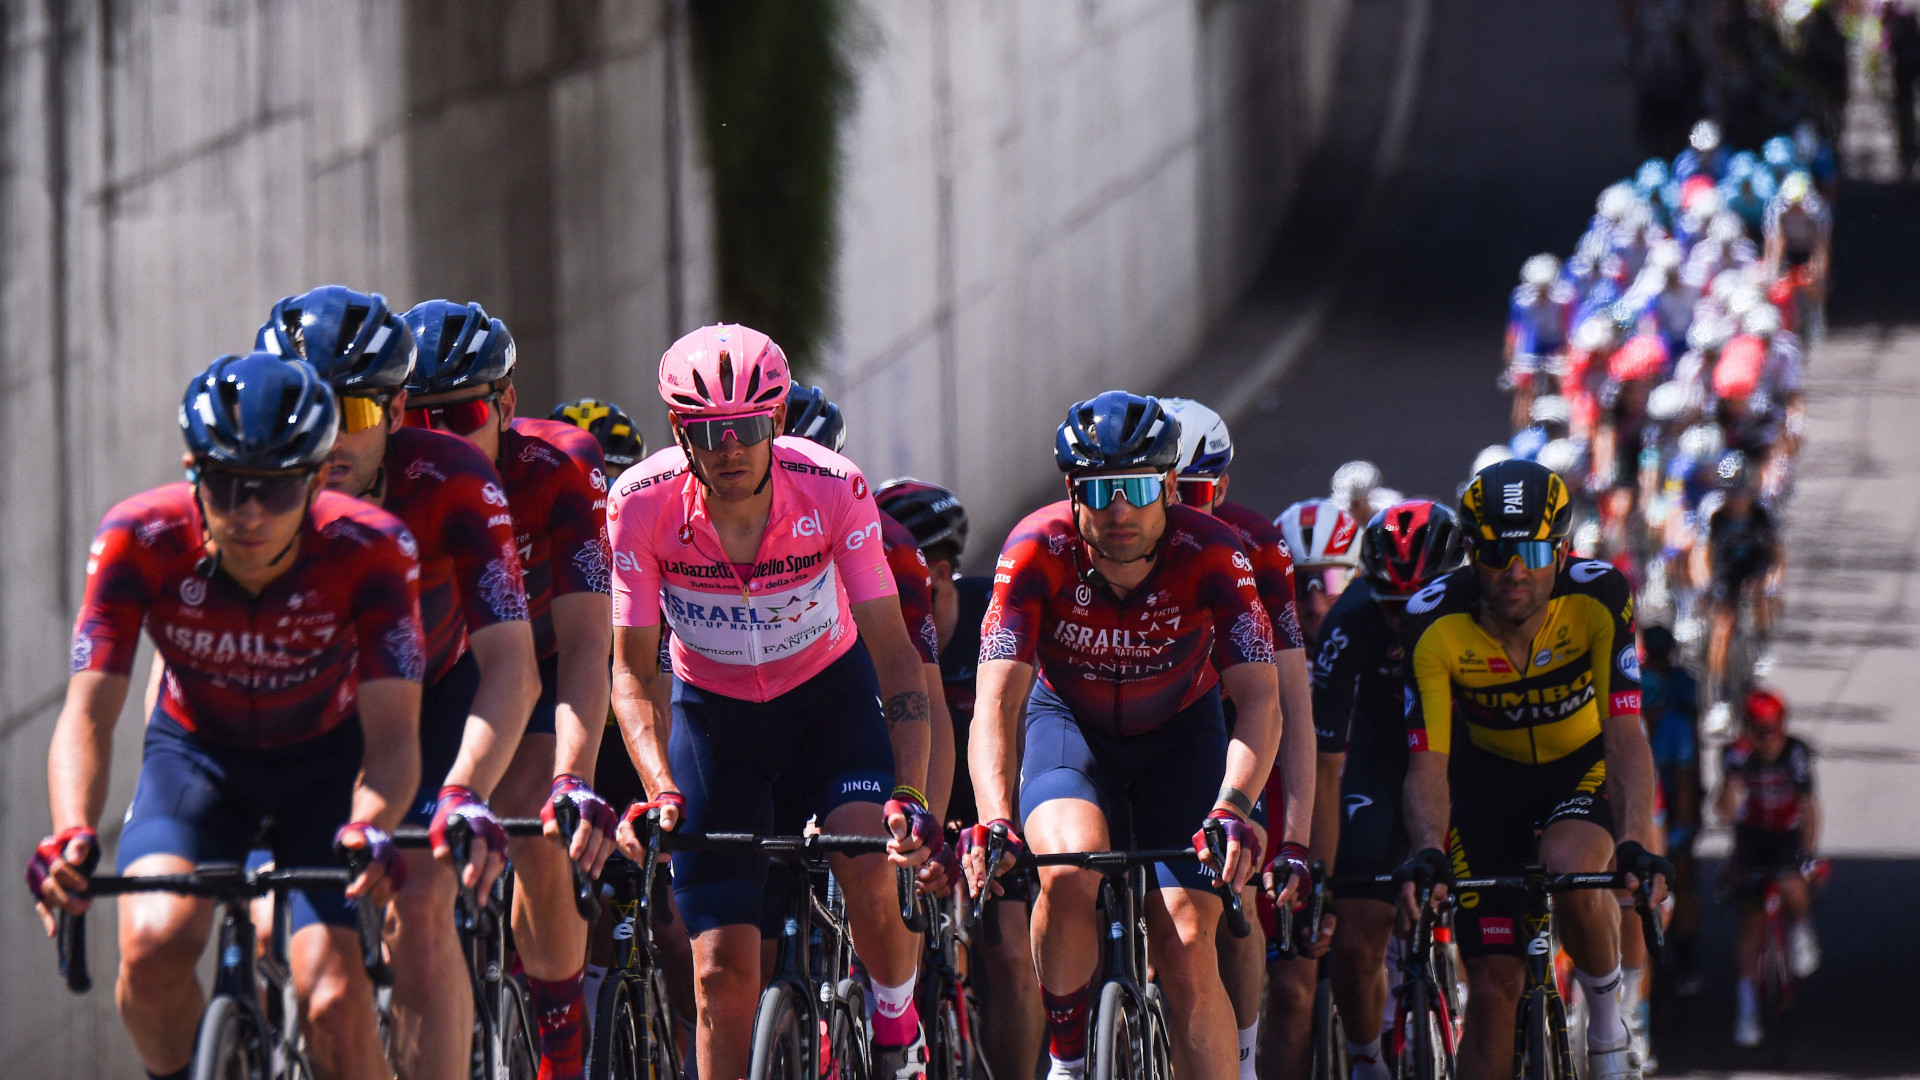 Giro d'Italia live stream how watch the cycling free online, Stage 19 start time What Hi-Fi?